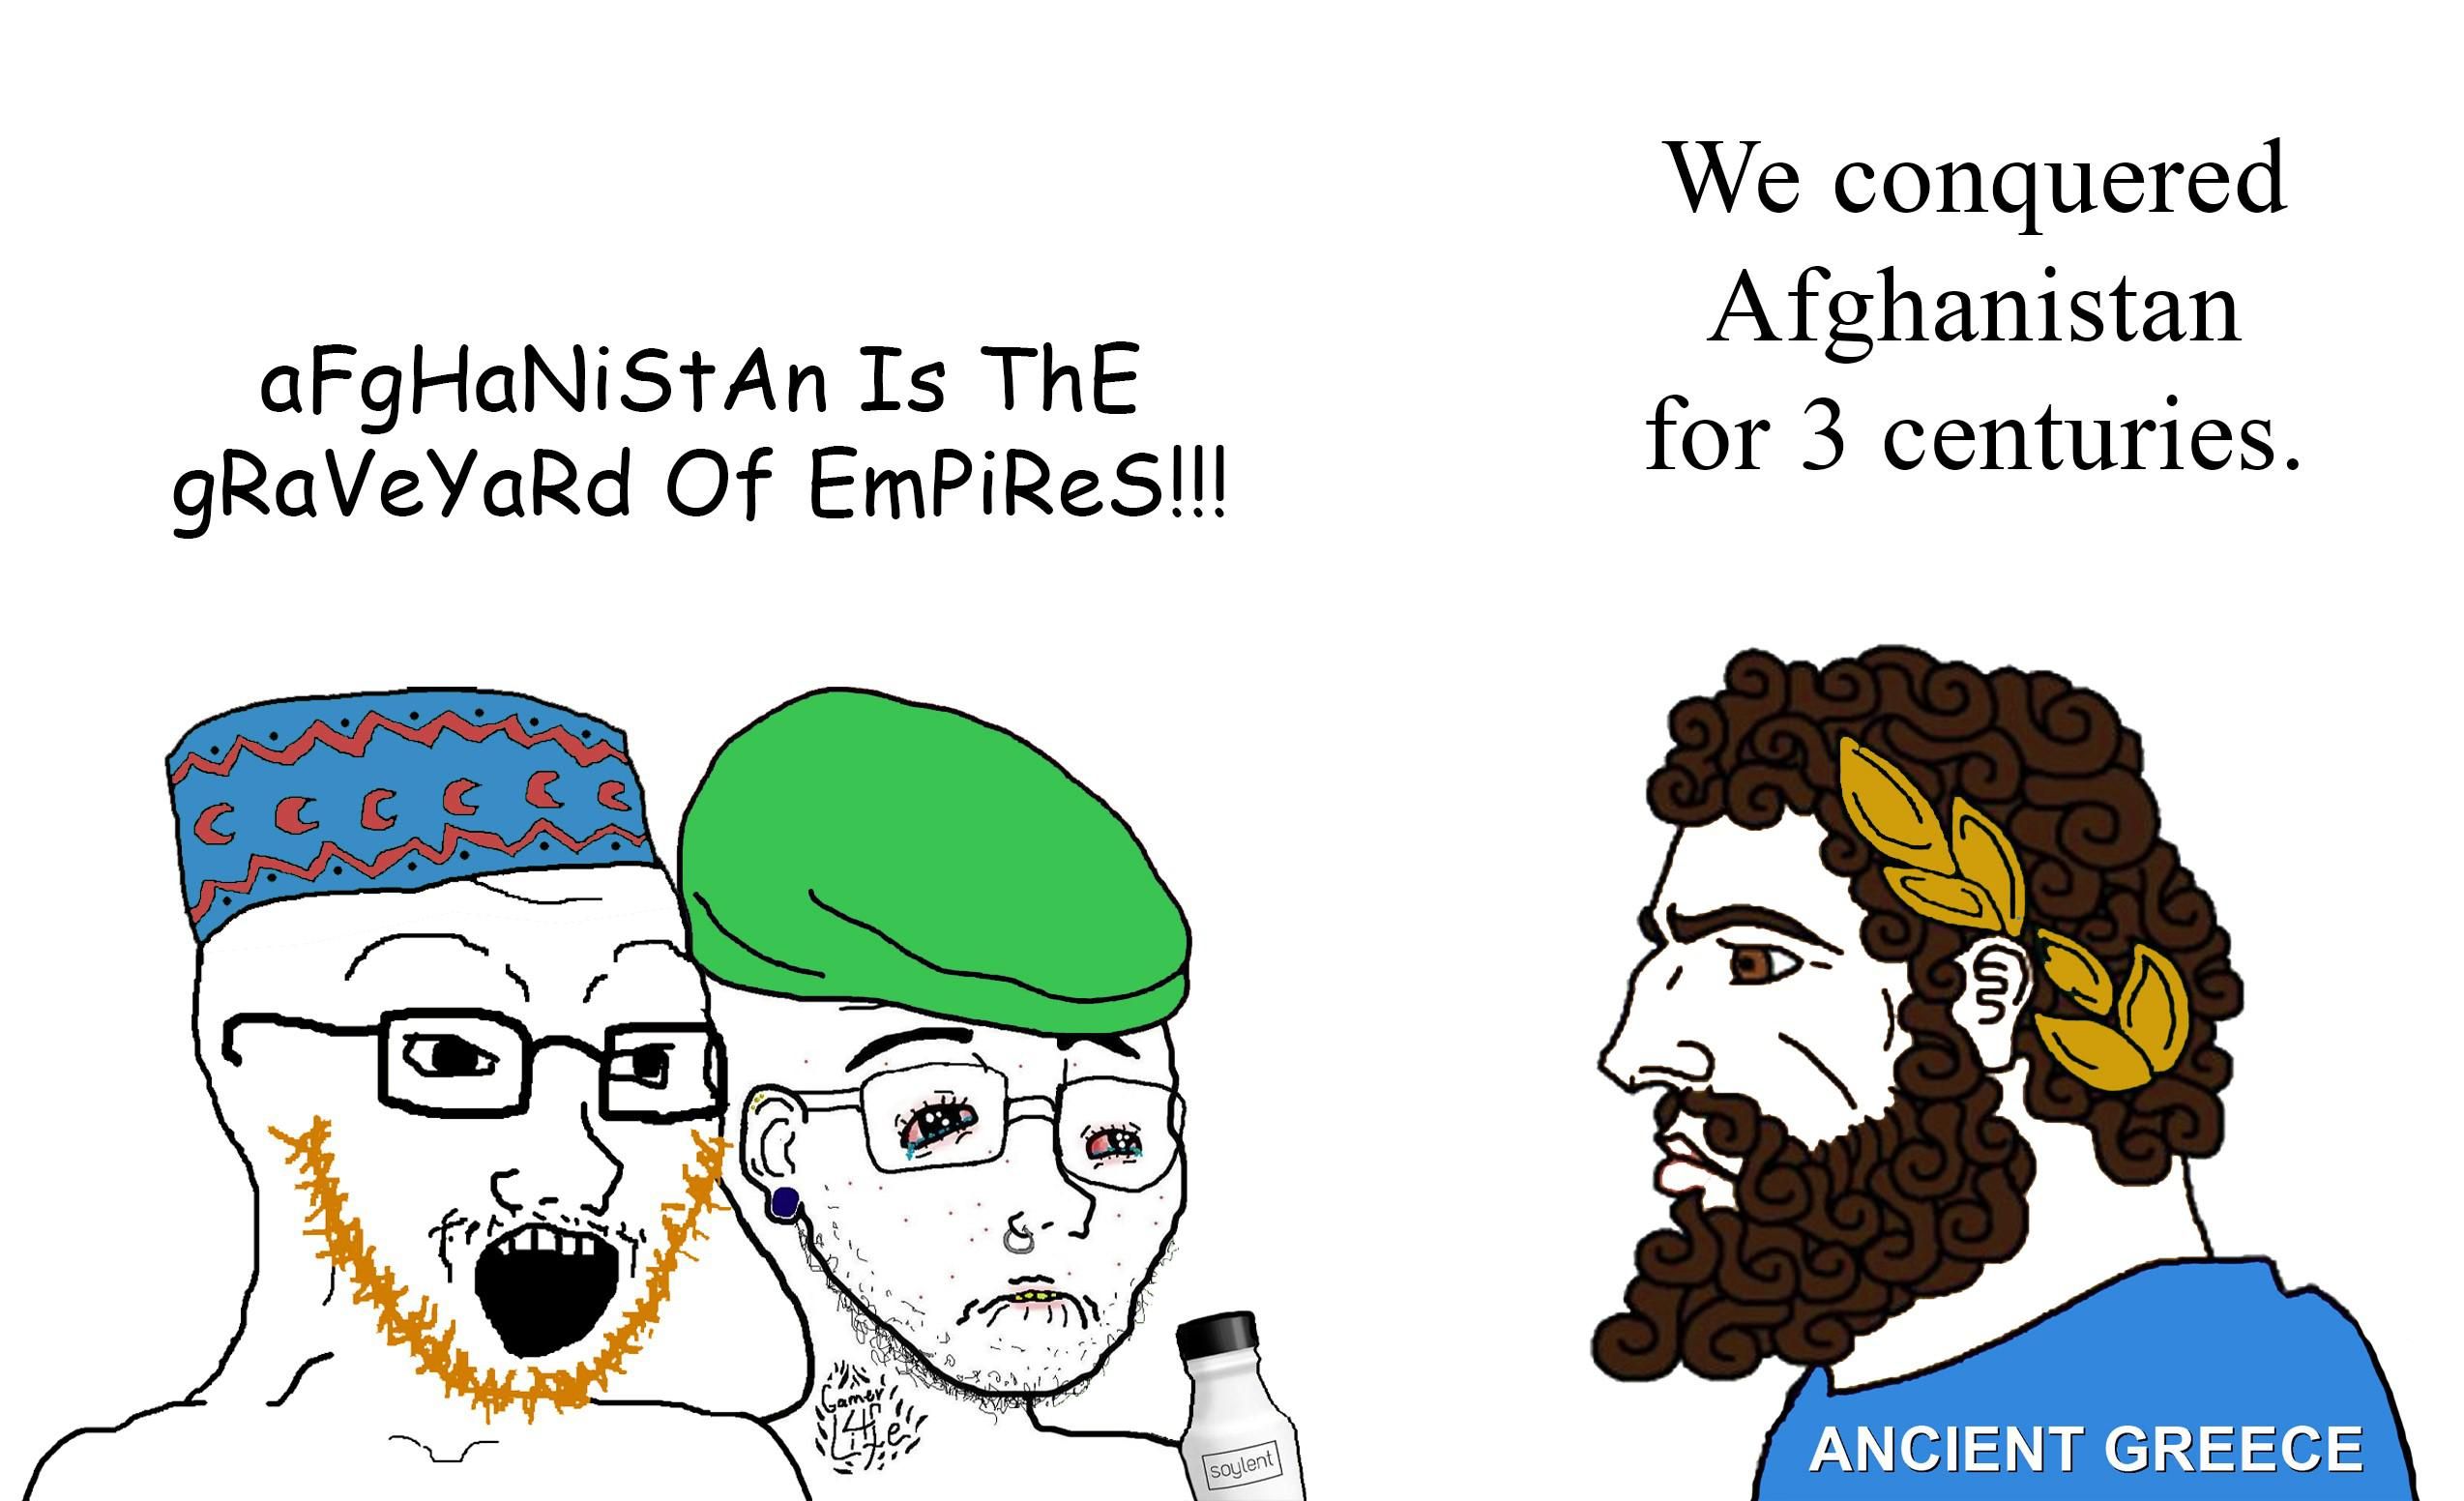 I wouldn't call Afghanistan a "graveyard of empires" when the Greeks were there for a while.